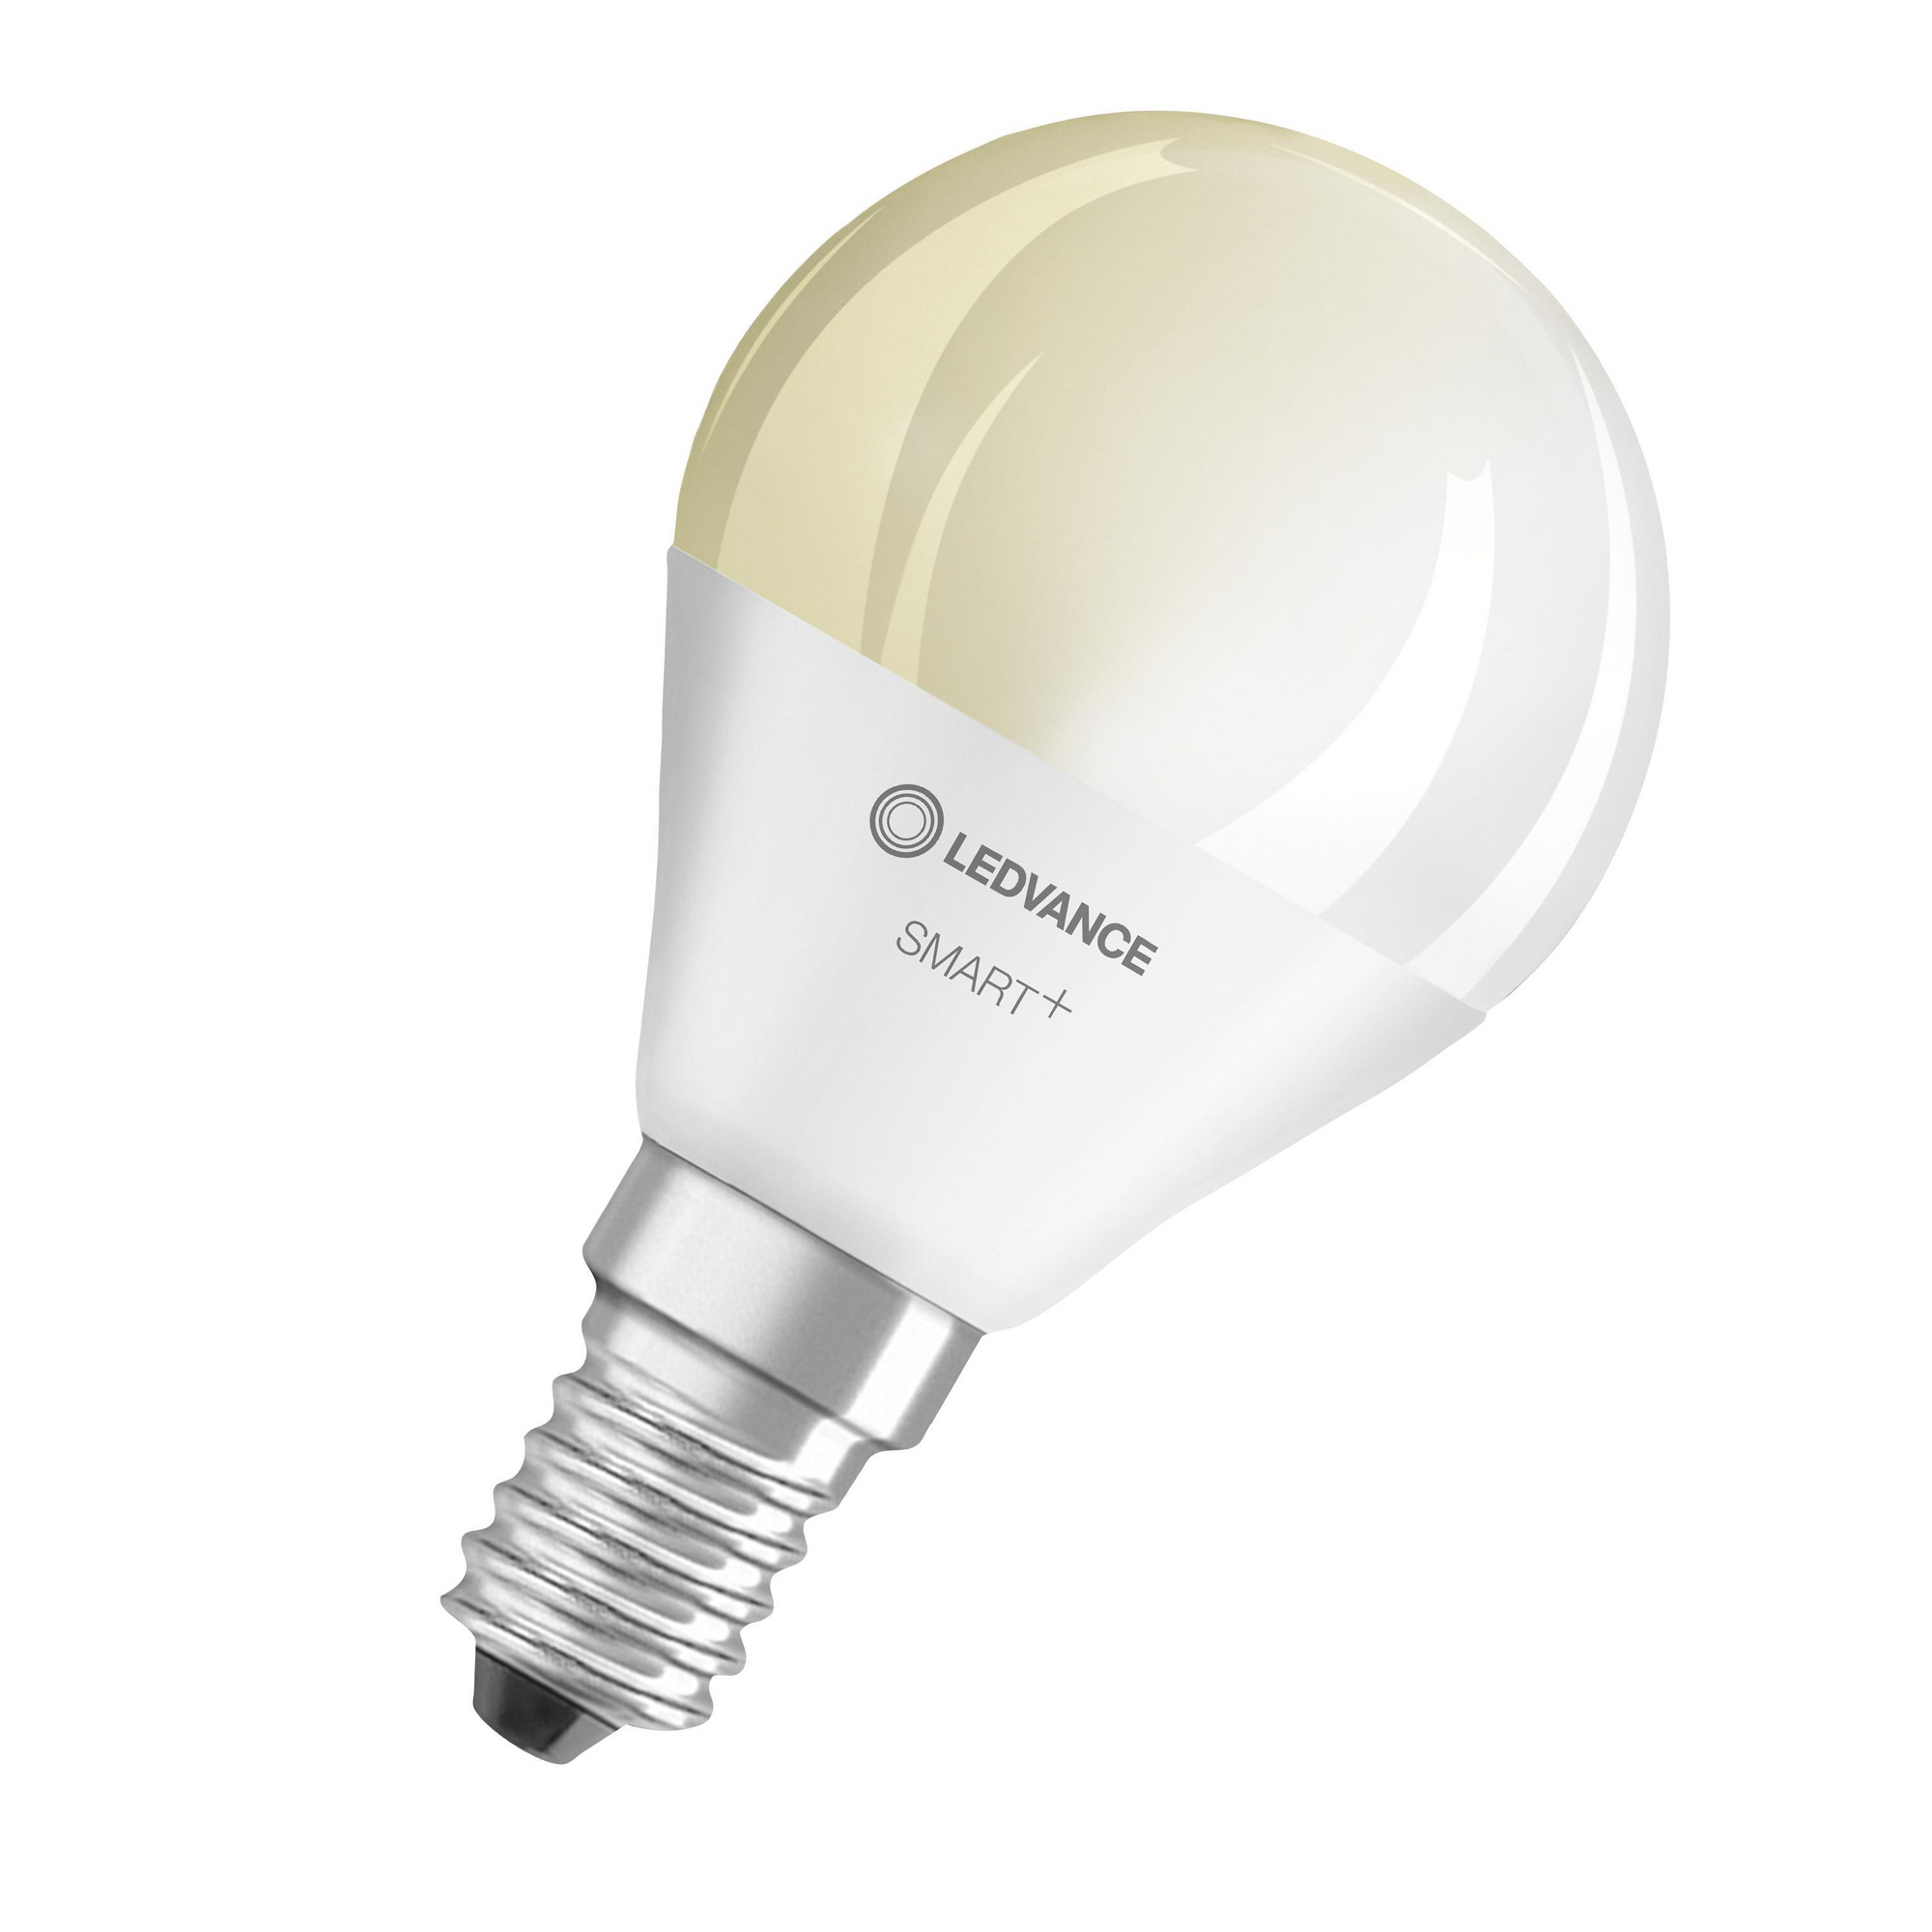 LED-Lampe 'Smart+' 8,9 cm 470 lm 5 W E14 weiß WLAN dimmbar + product picture